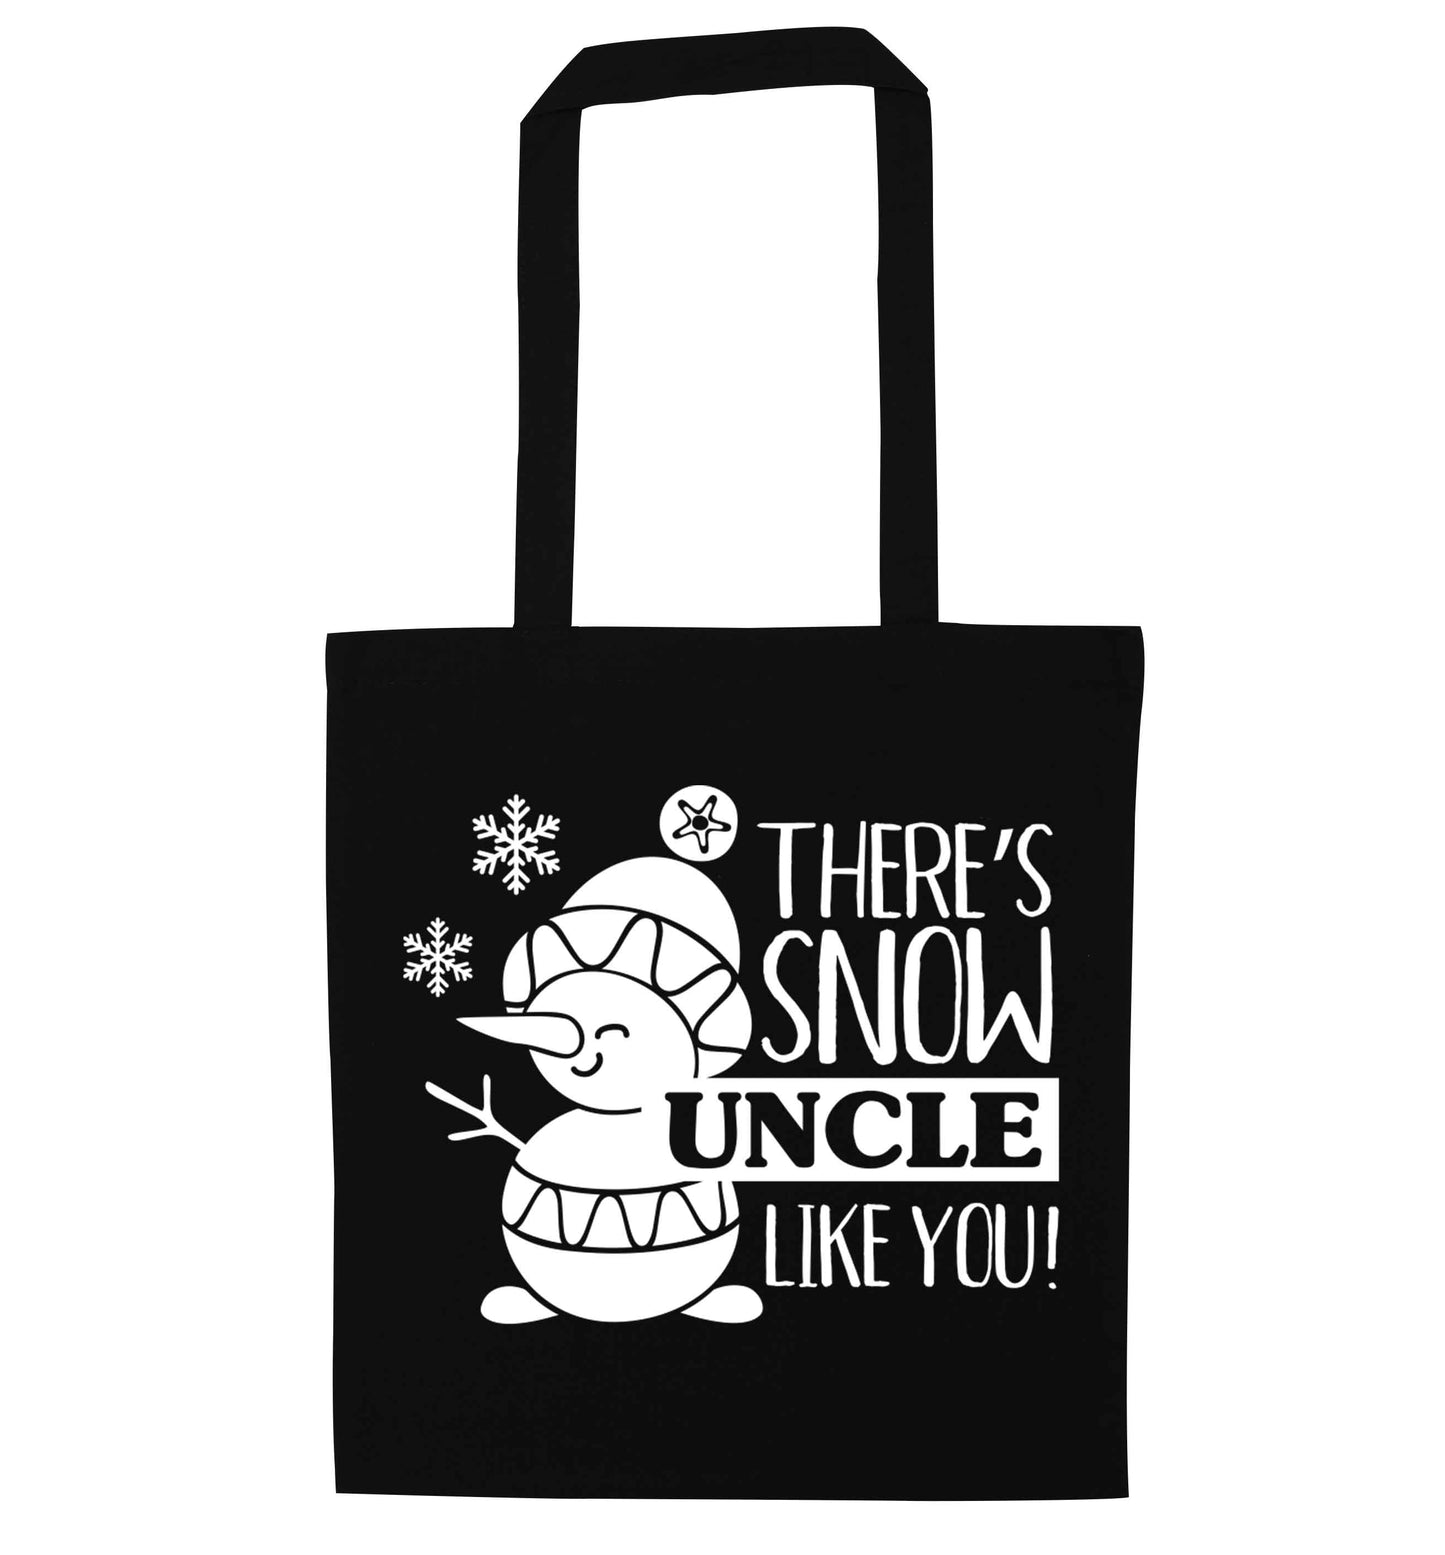 There's snow uncle like you black tote bag